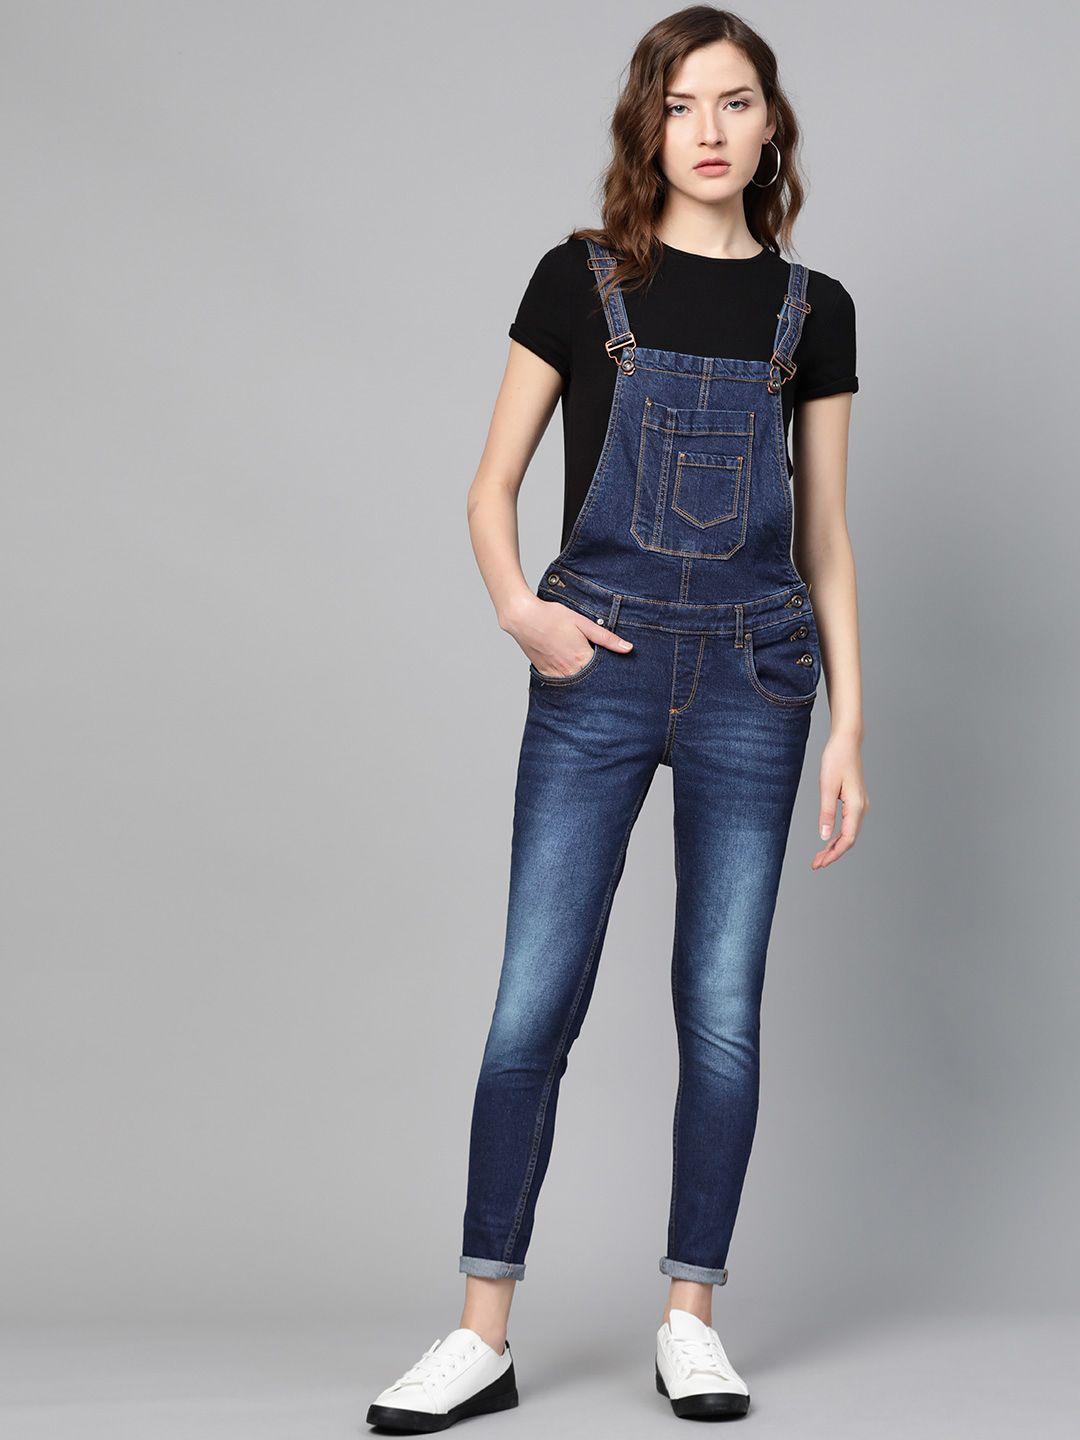 the roadster lifestyle co women navy blue faded skinny fit denim dungarees